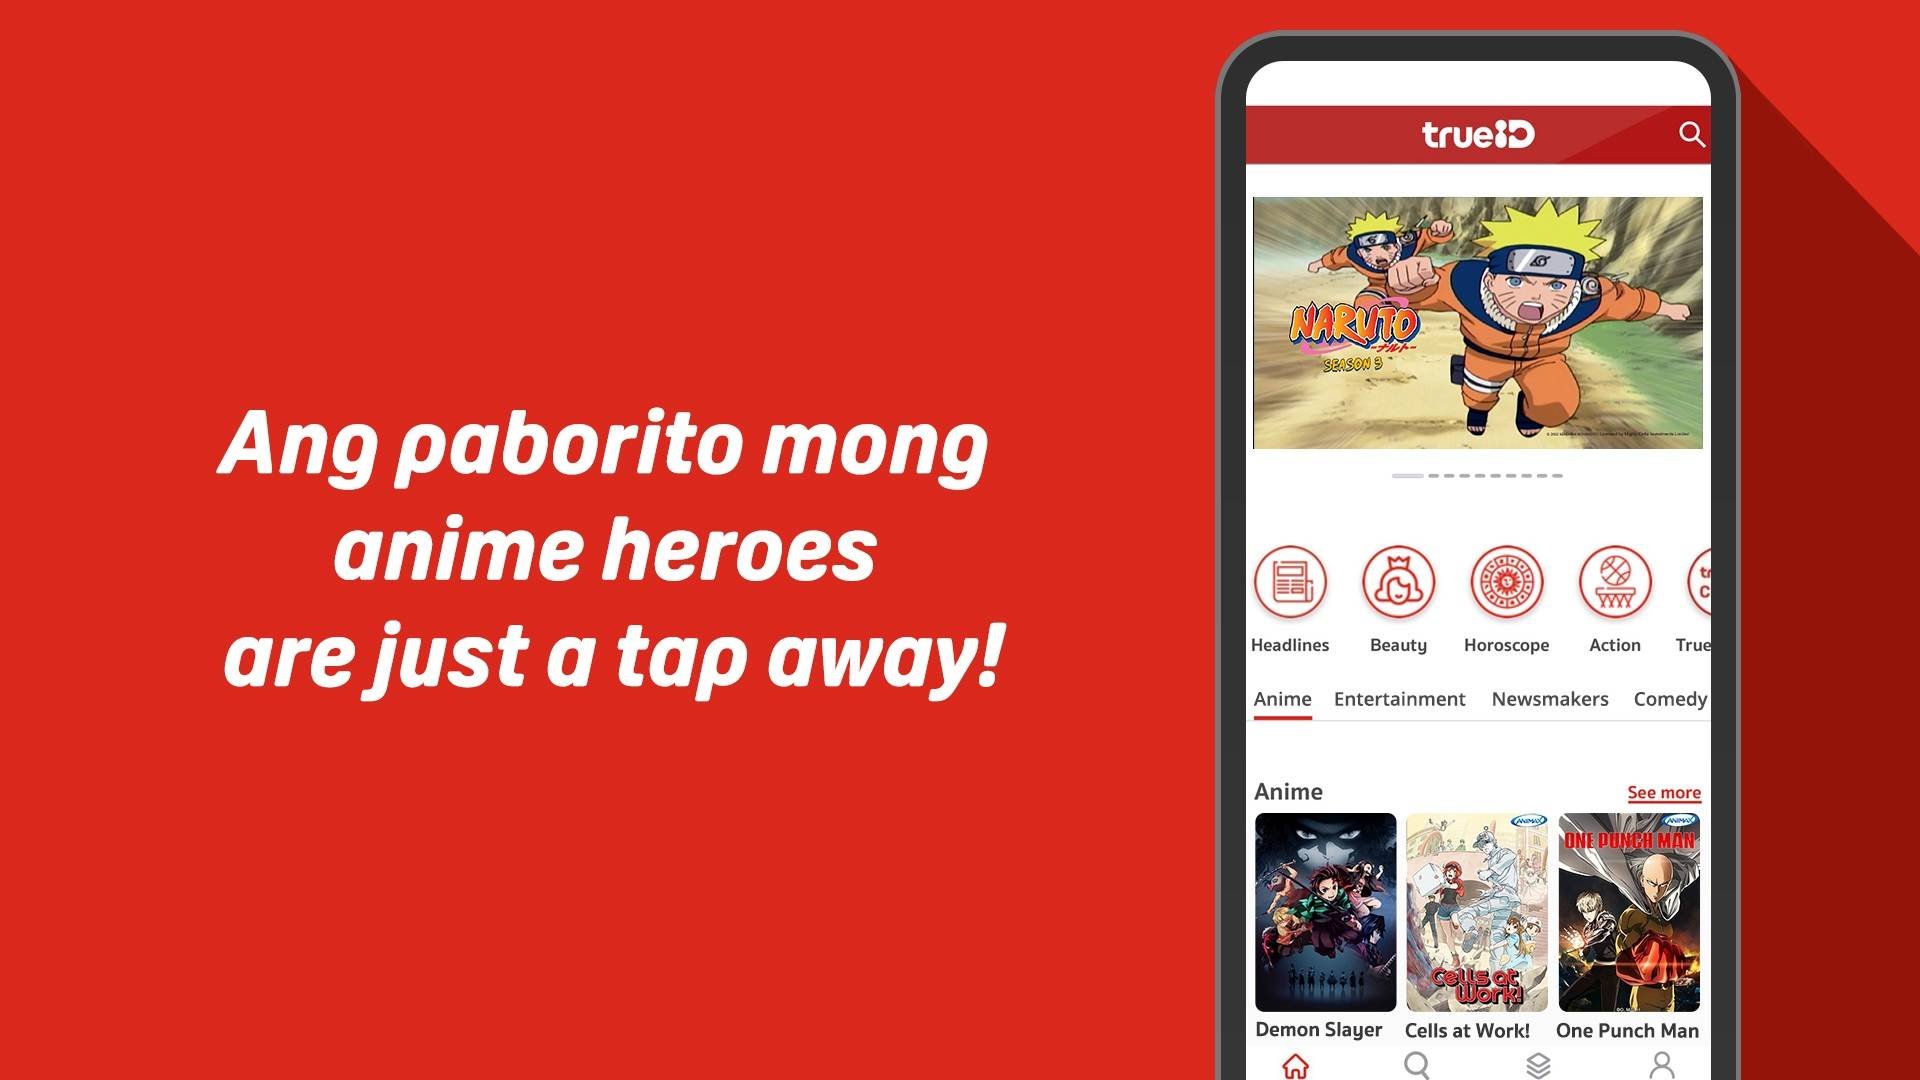 5 top-rated anime series to watch on TrueID for FREE! - TrueID